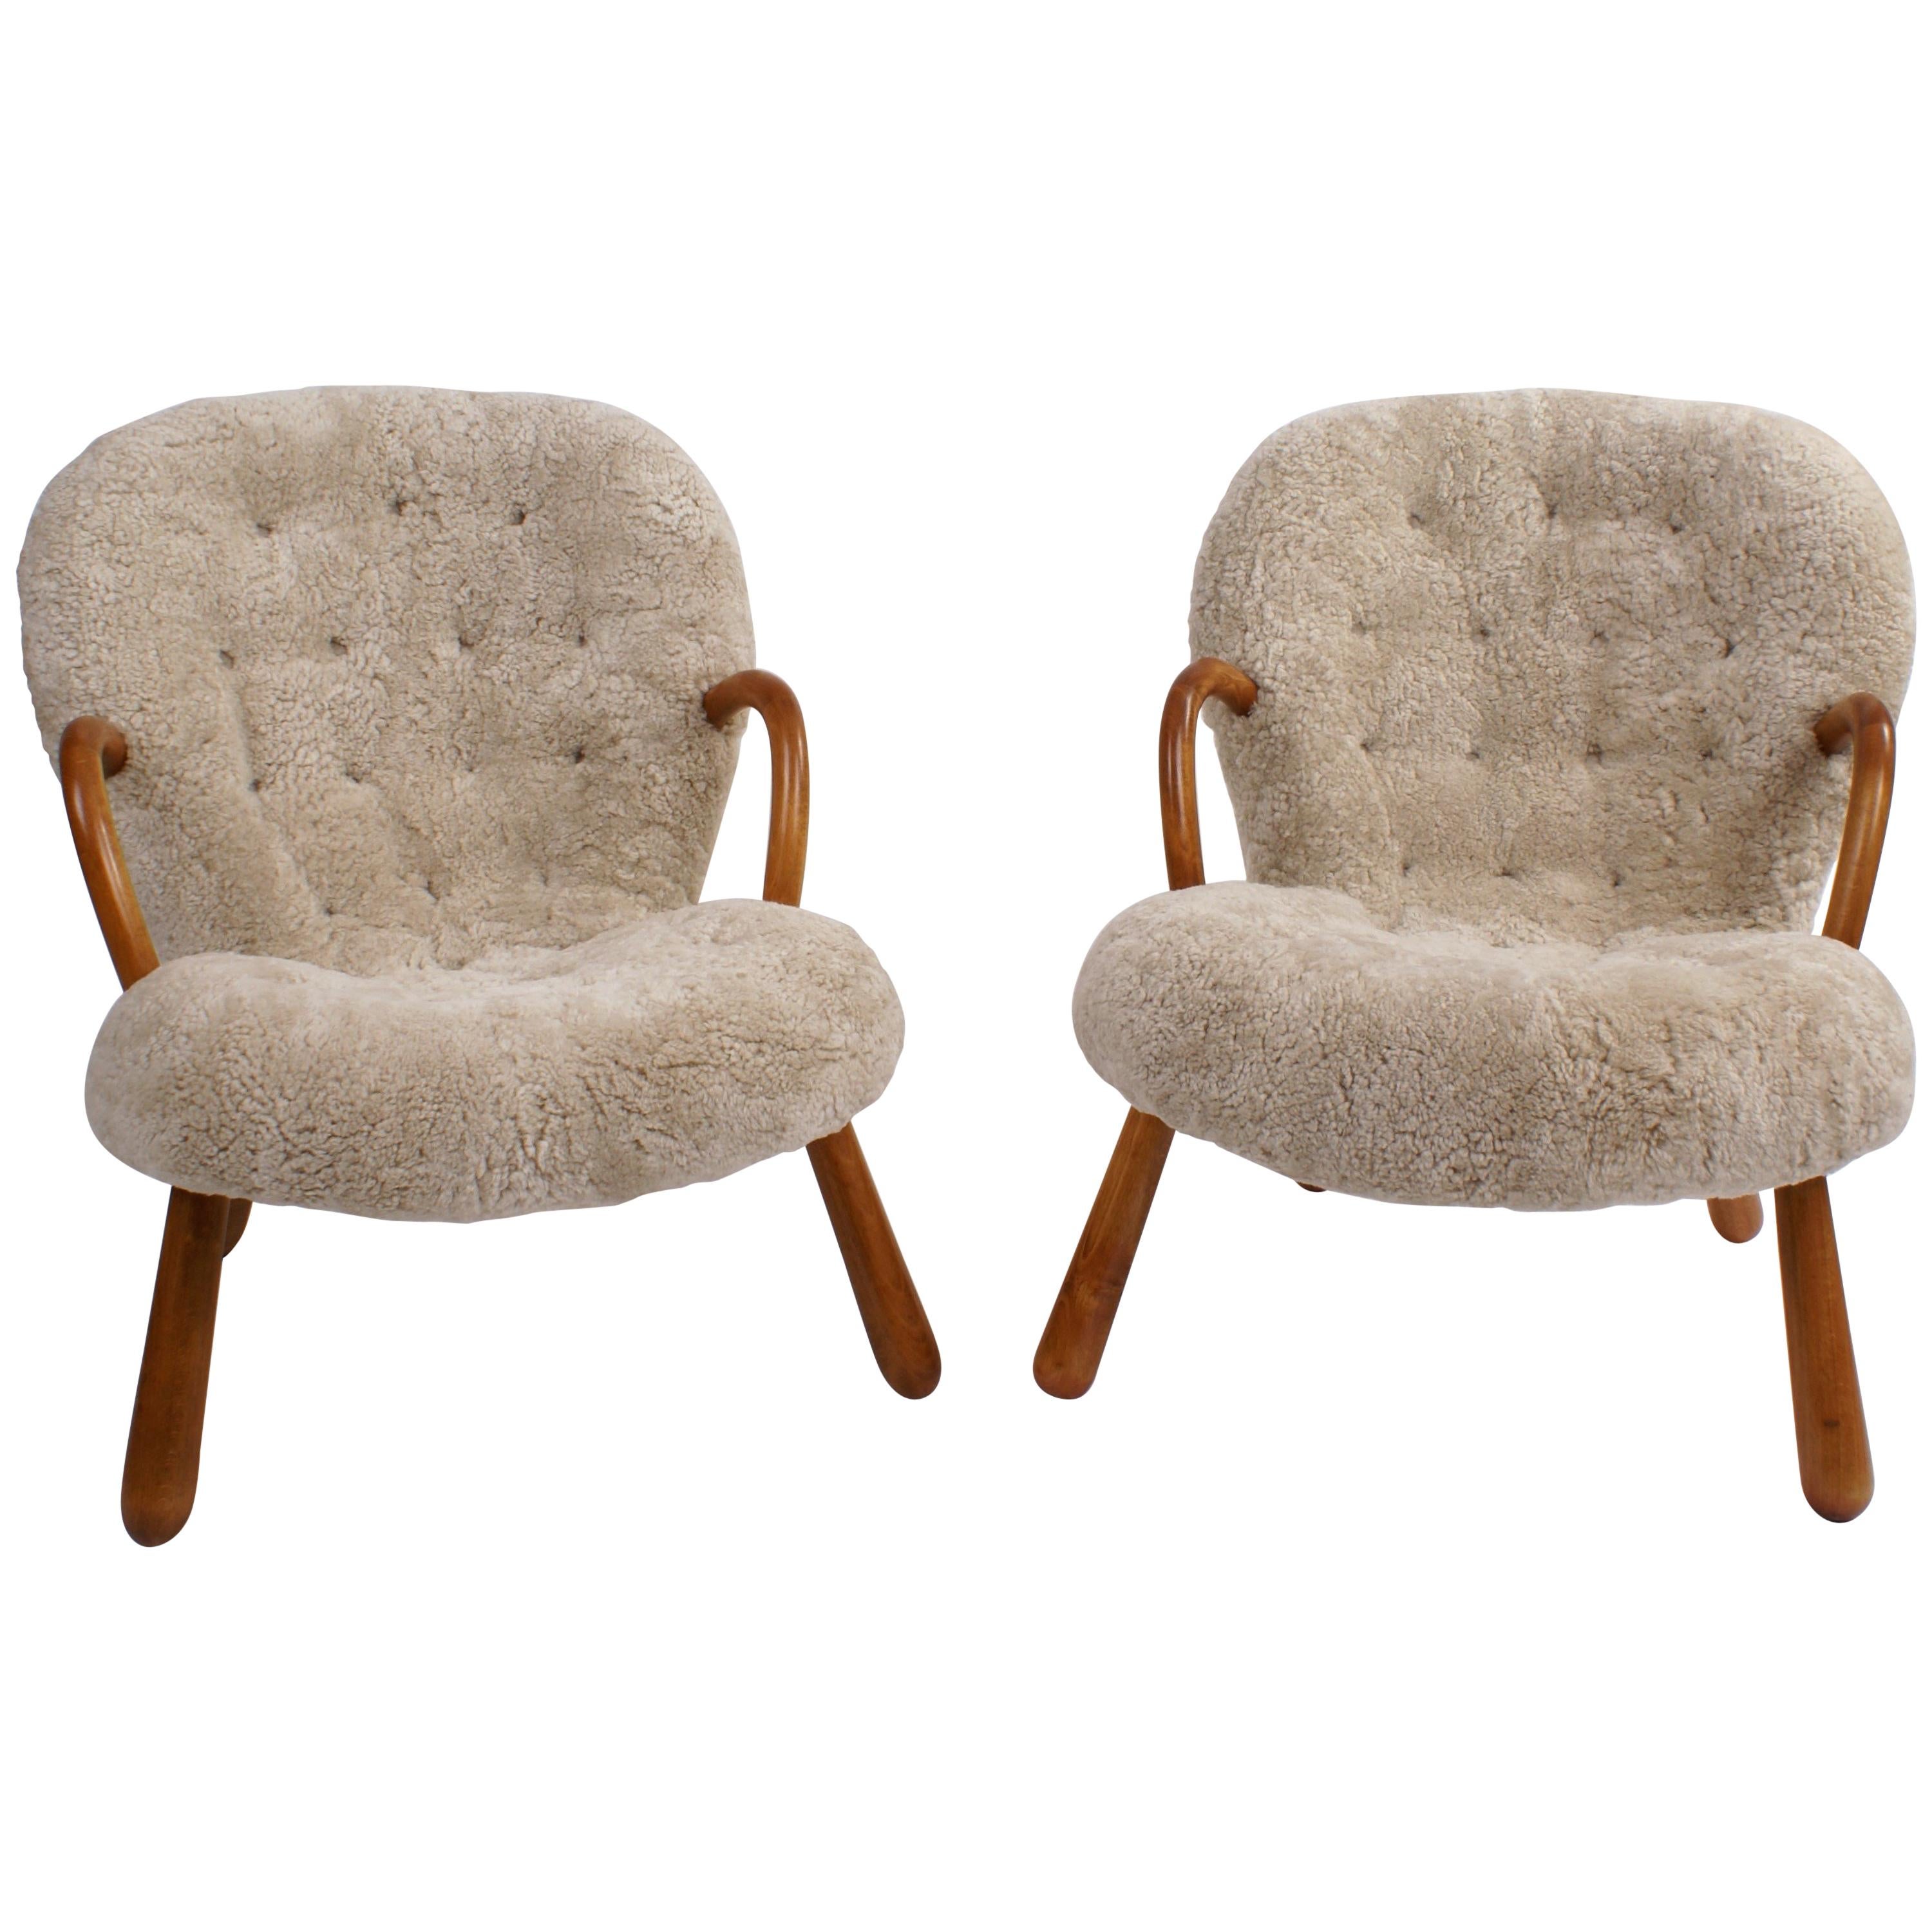 Philip Arctander Pair of 'Clam' Easy Chairs in Pale Grey Sheepskin, 1944